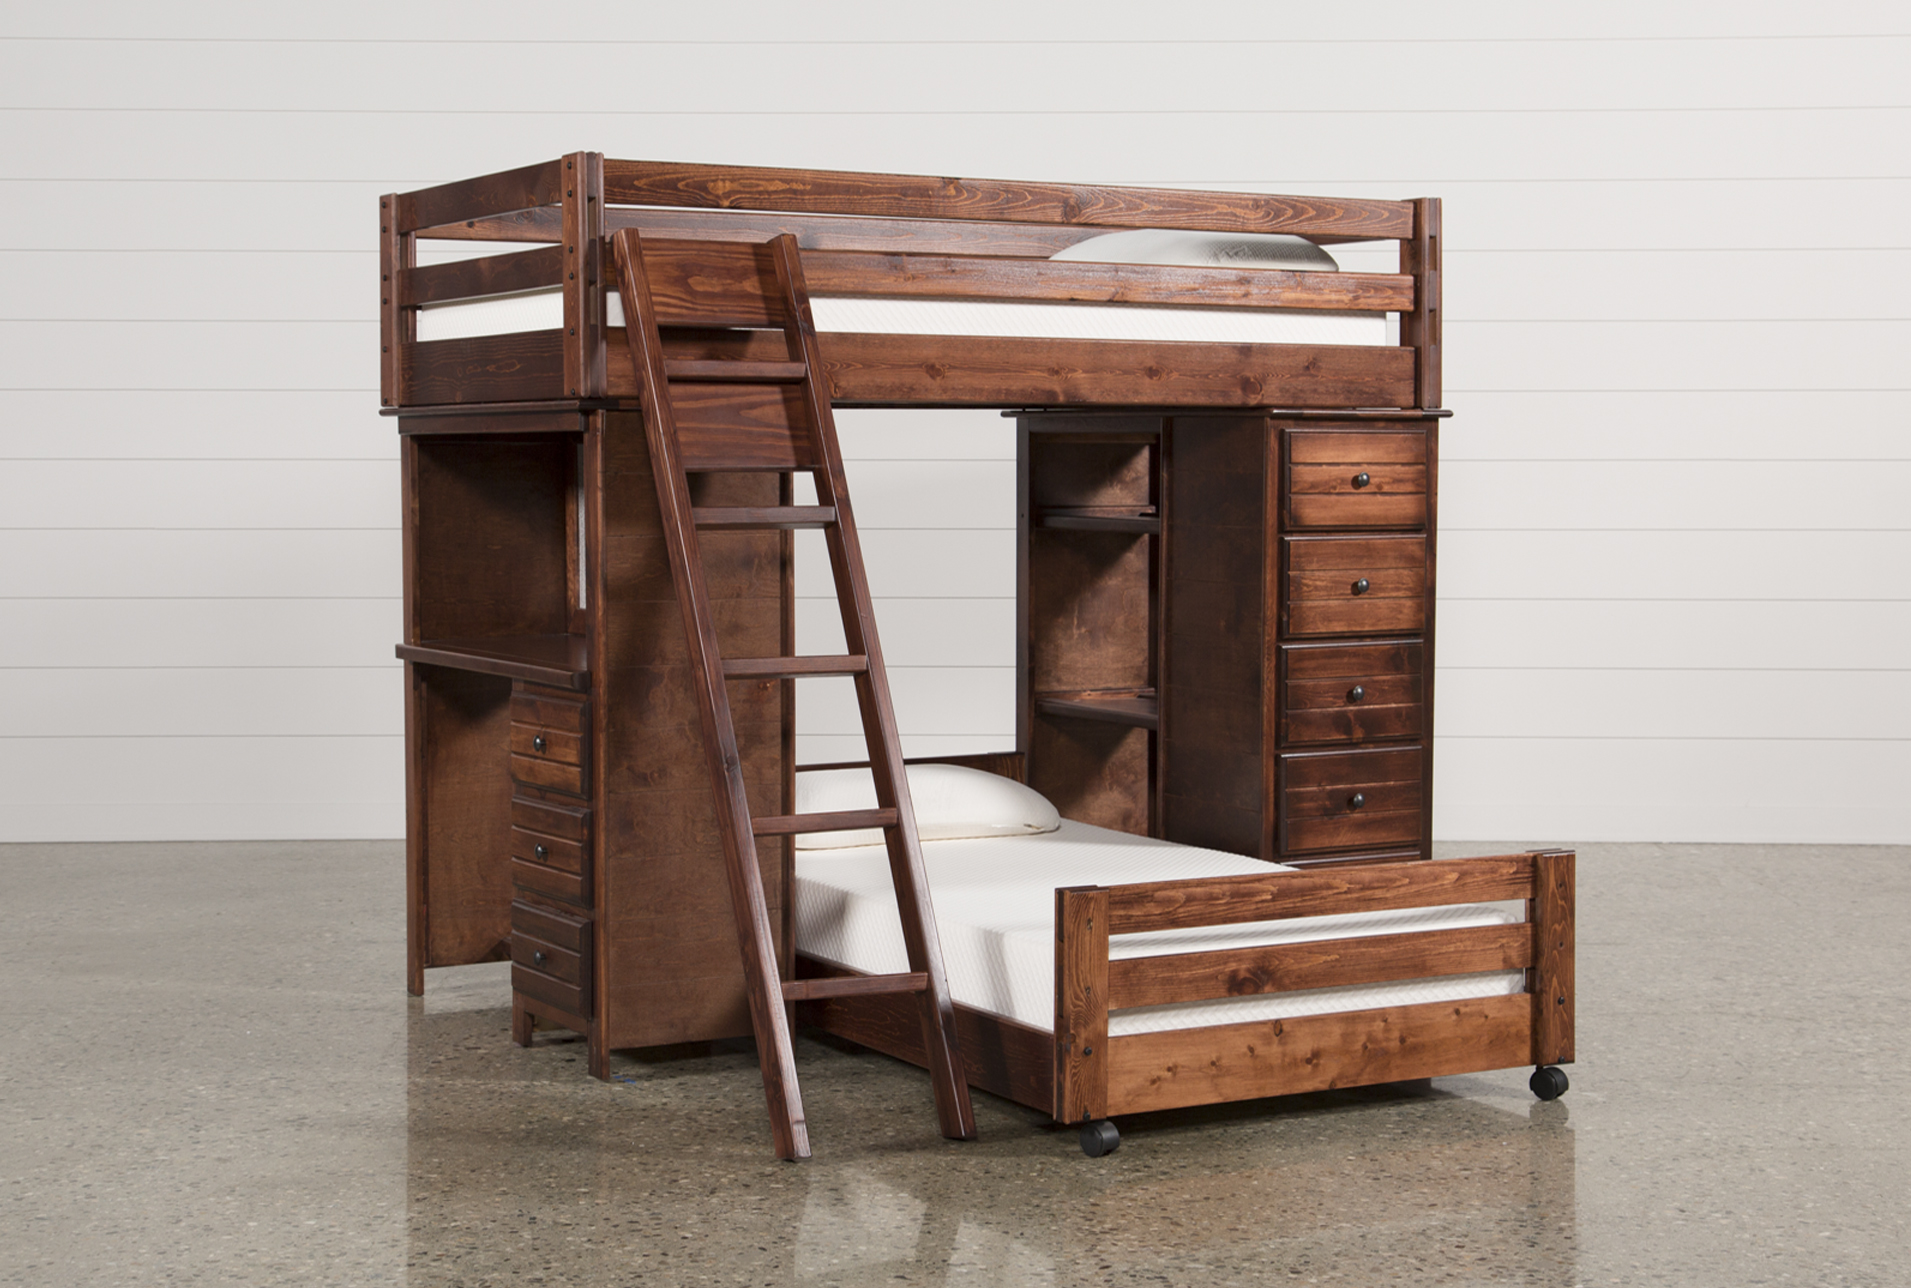 pine bunk bed with desk